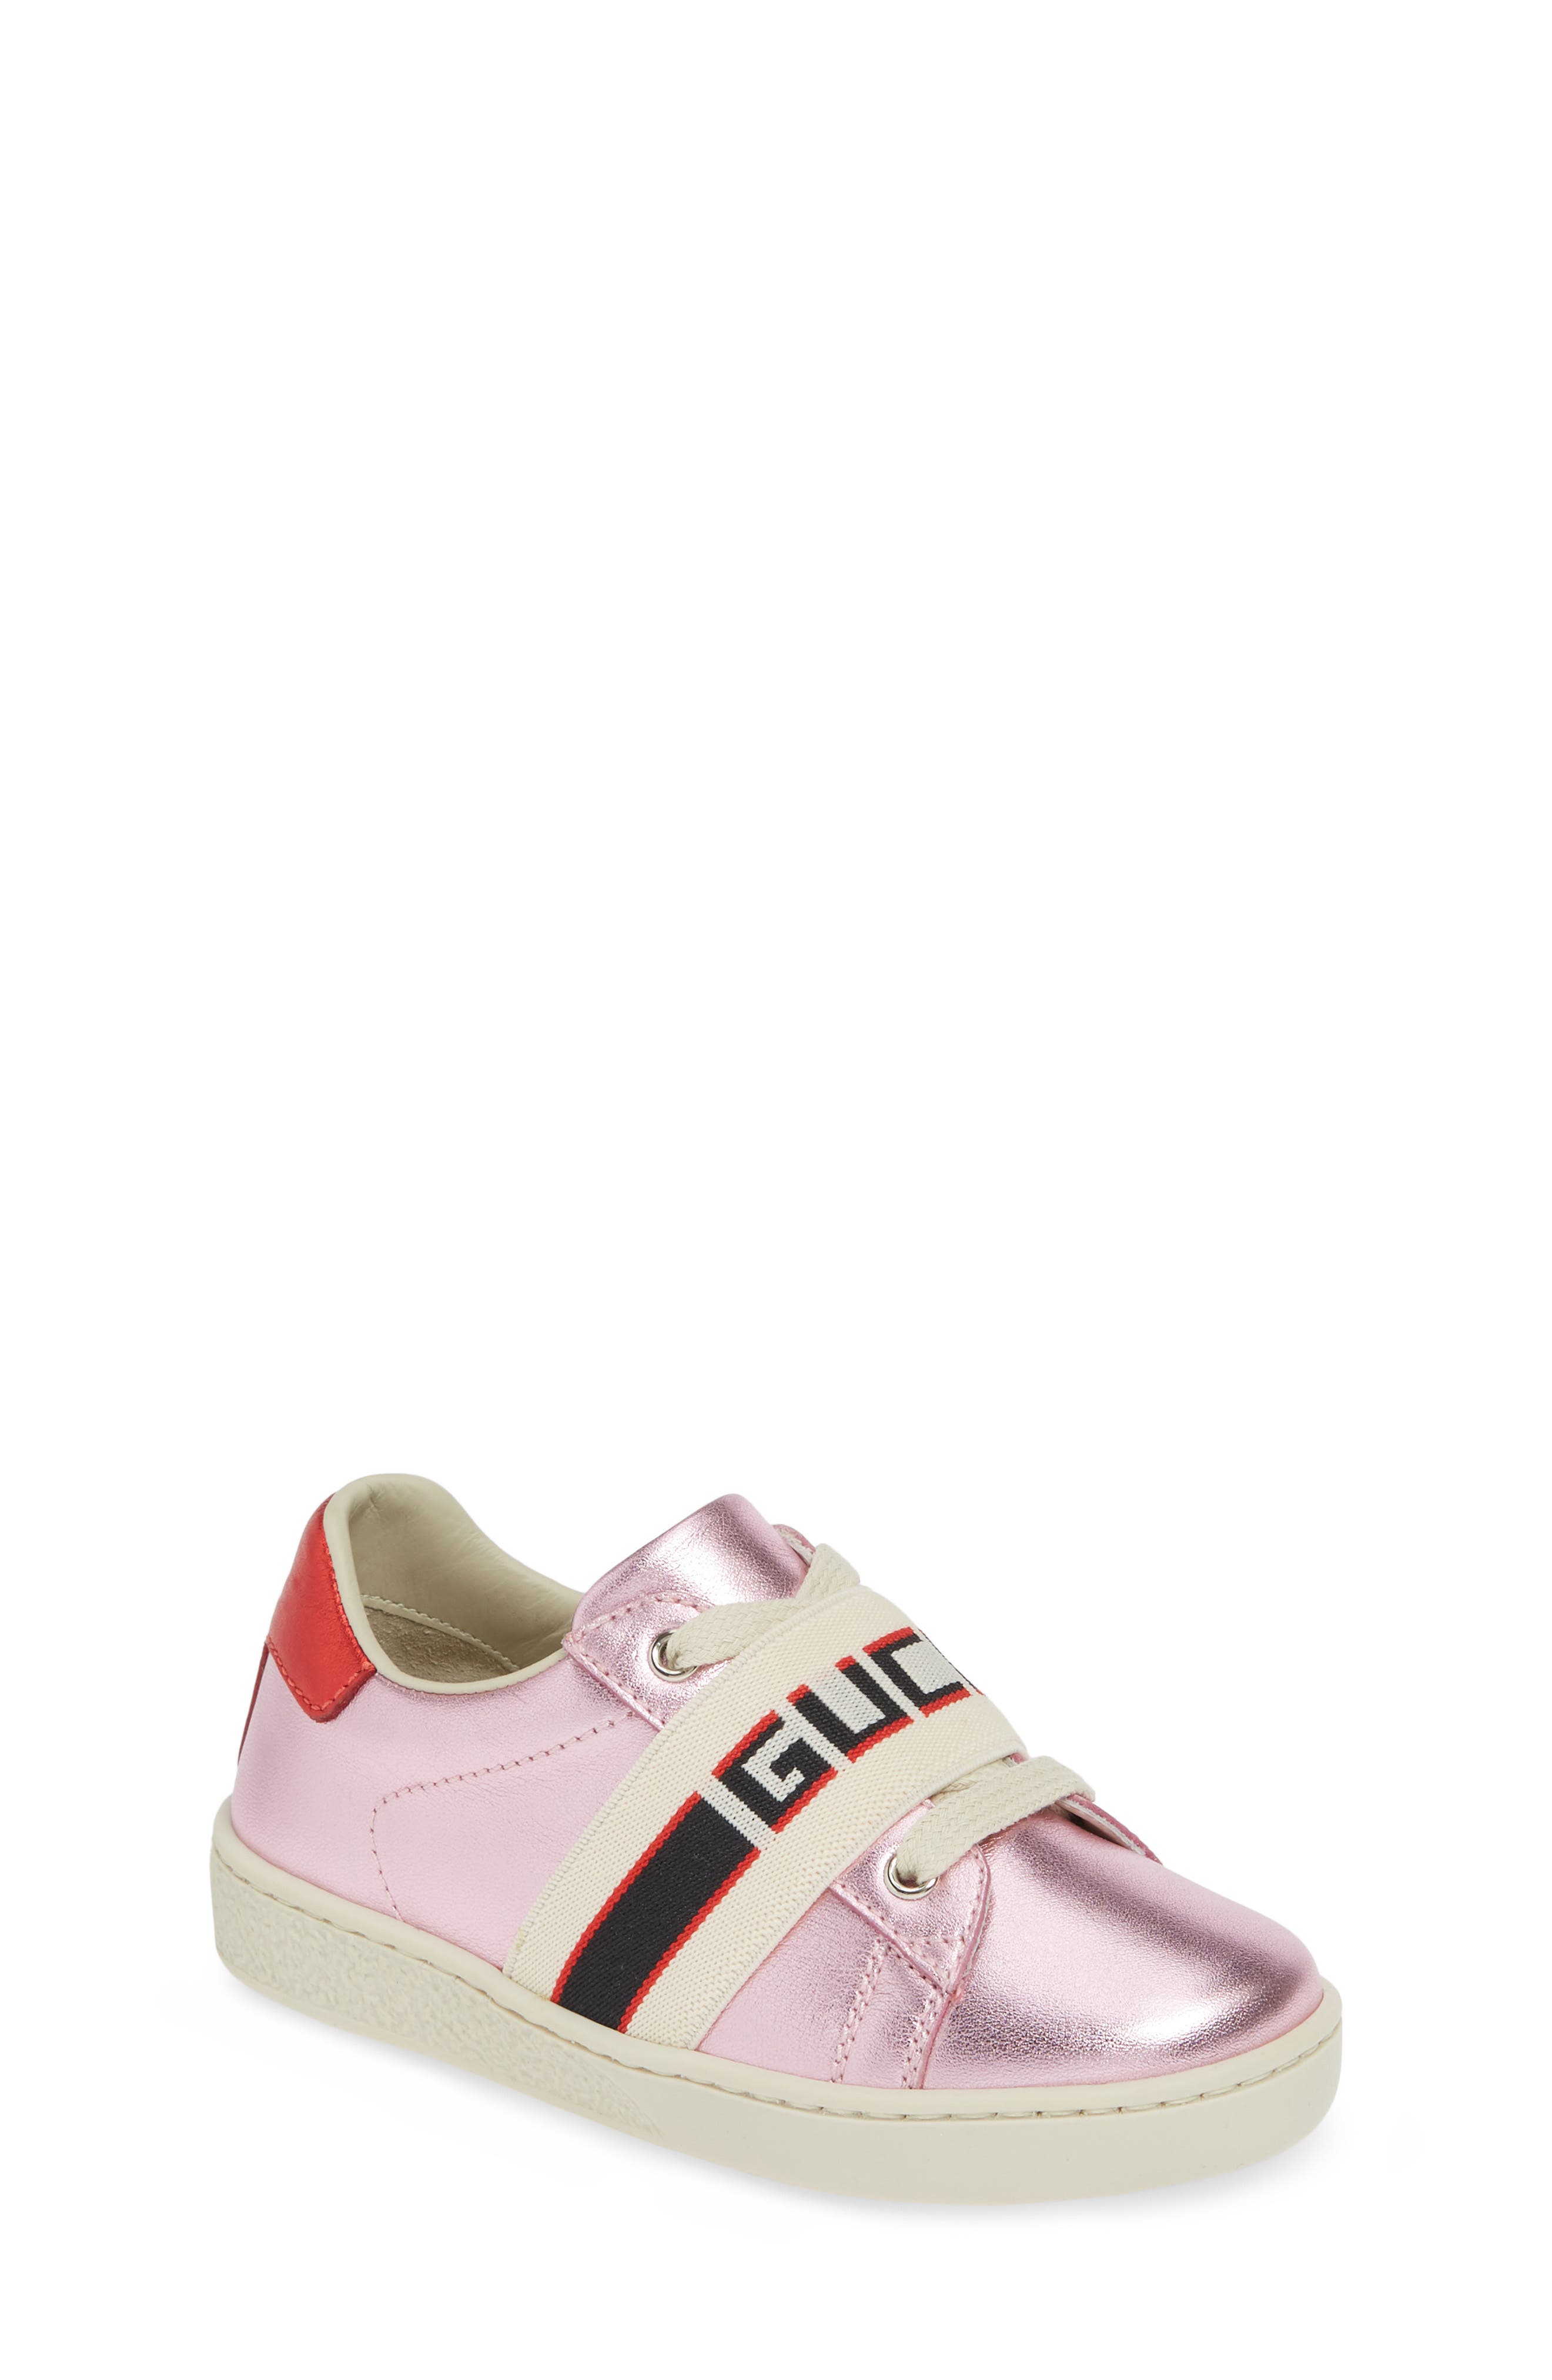 gucci shoes for kids size 4